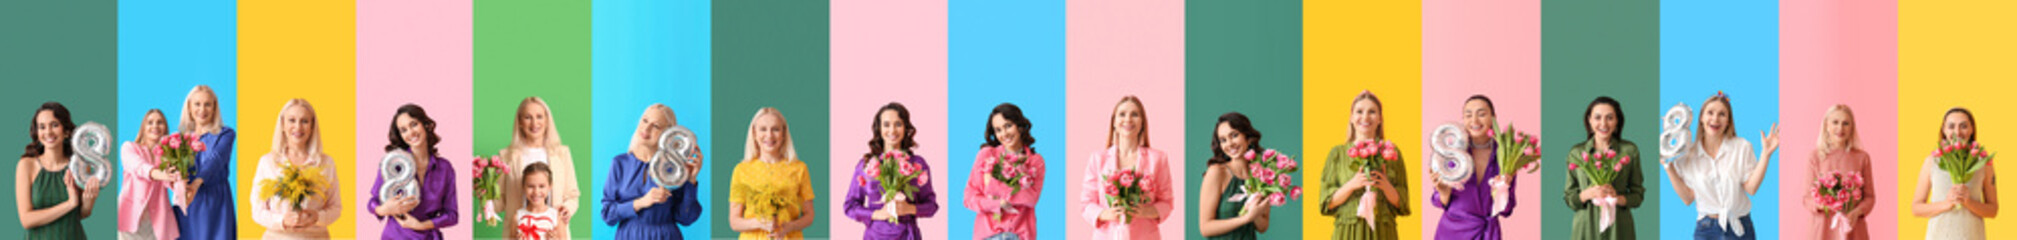 Group of women with bouquets of flowers and balloons in shape of figure 8 on color background....